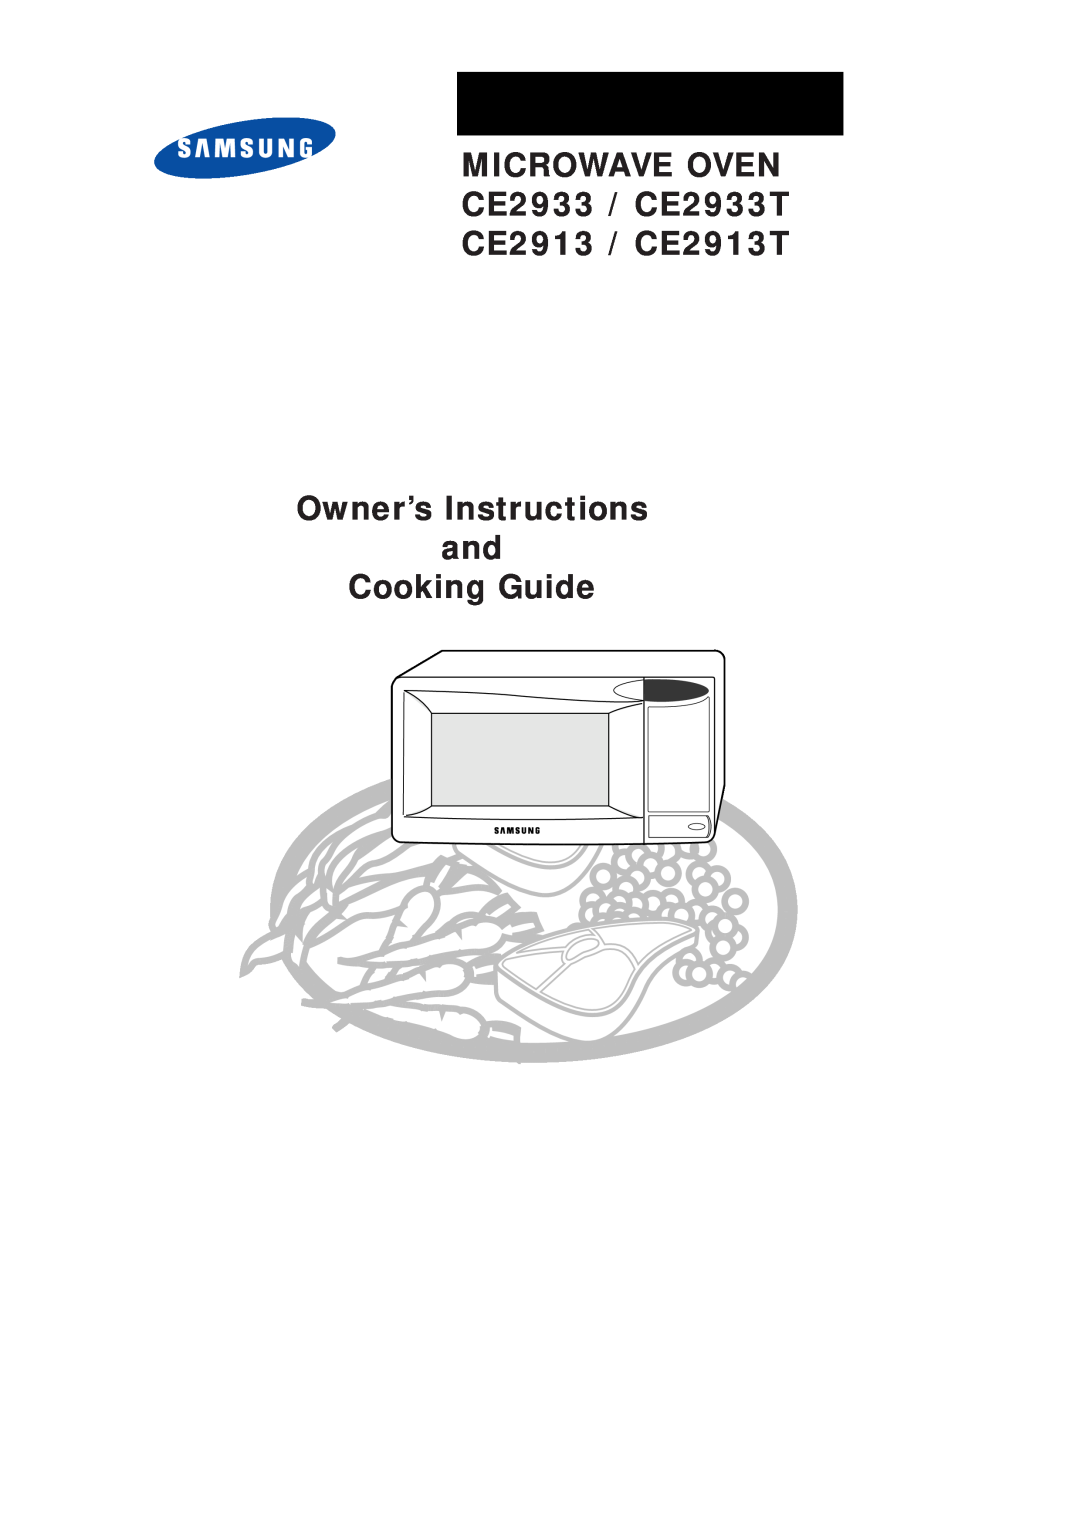 Samsung manual MICROWAVE OVEN CE2933 / CE2933T CE2913 / CE2913T Owner’s Instructions, and Cooking Guide 